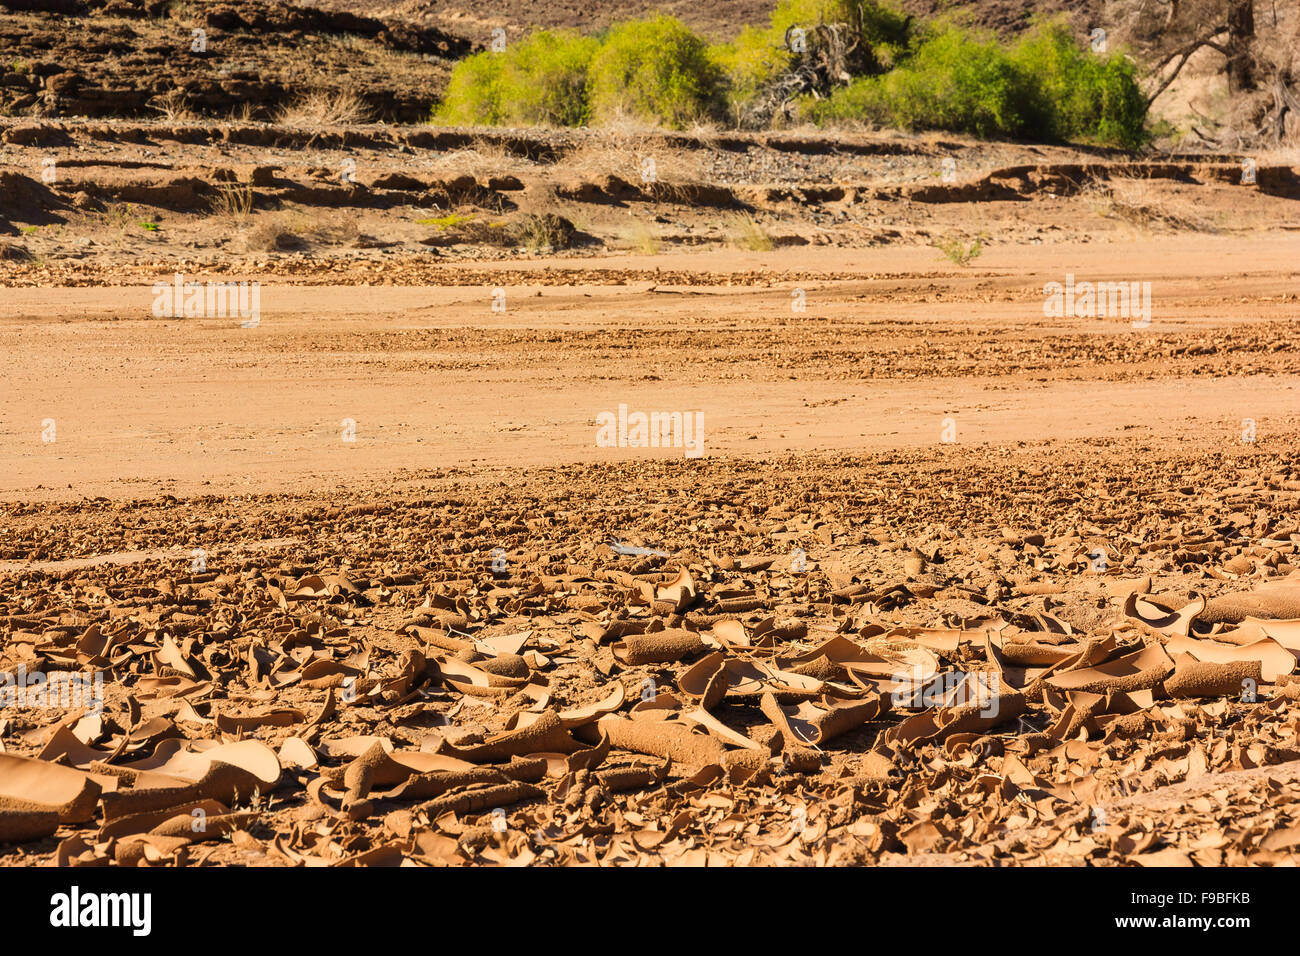 Dry riverbed with cracked surface of brown mud. Namibia, Damaraland, Africa. Stock Photo